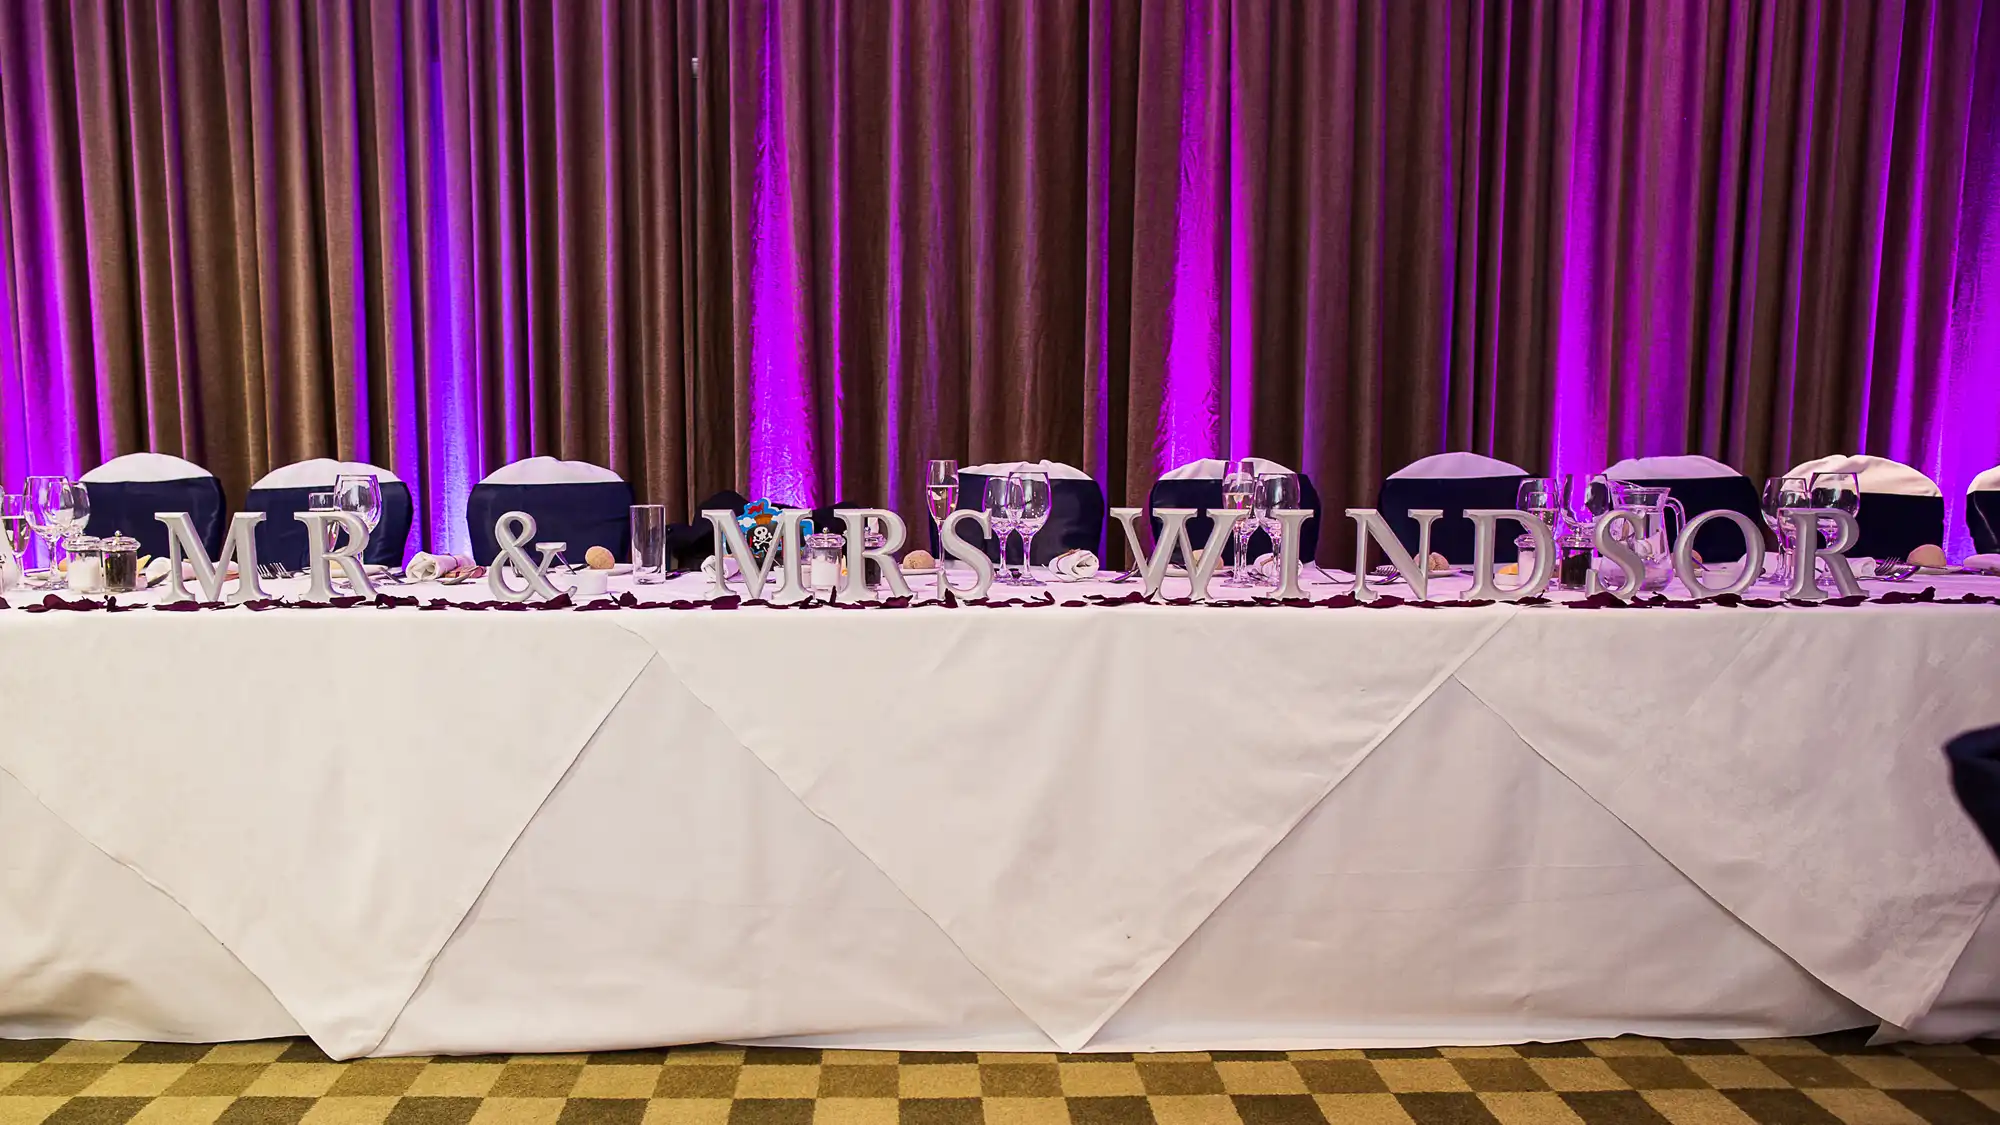 Decorated banquet table with "mr & mrs windhor" written in large white letters at a wedding reception, with purple lighting in the background.